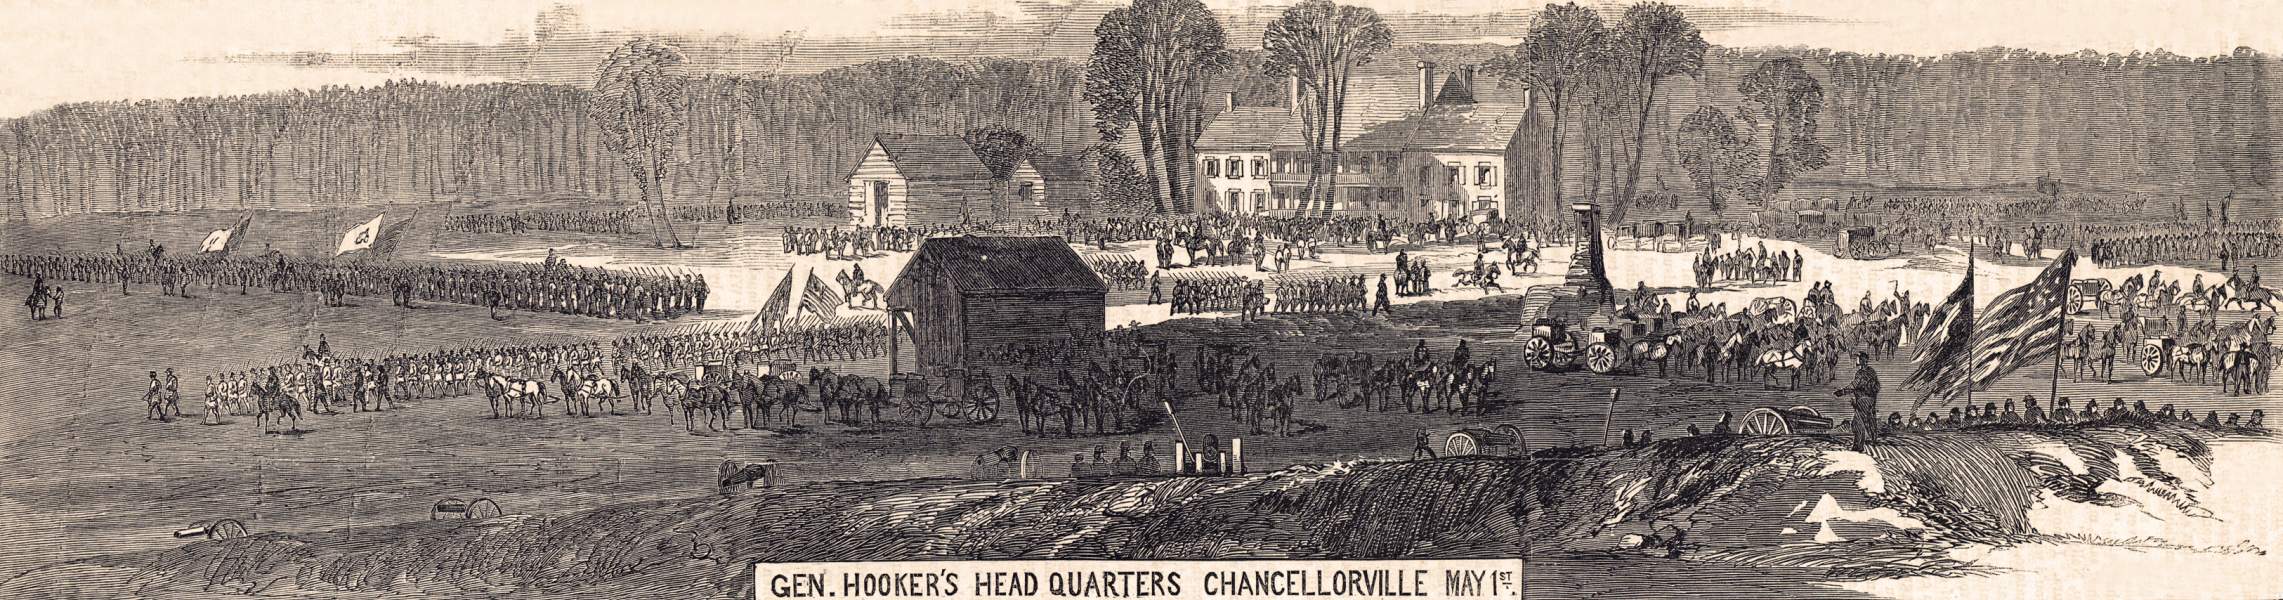 General Hooker's Headquarters, Chancellorsville, Virginia, May 1, 1863, artist's impression, zoomable image